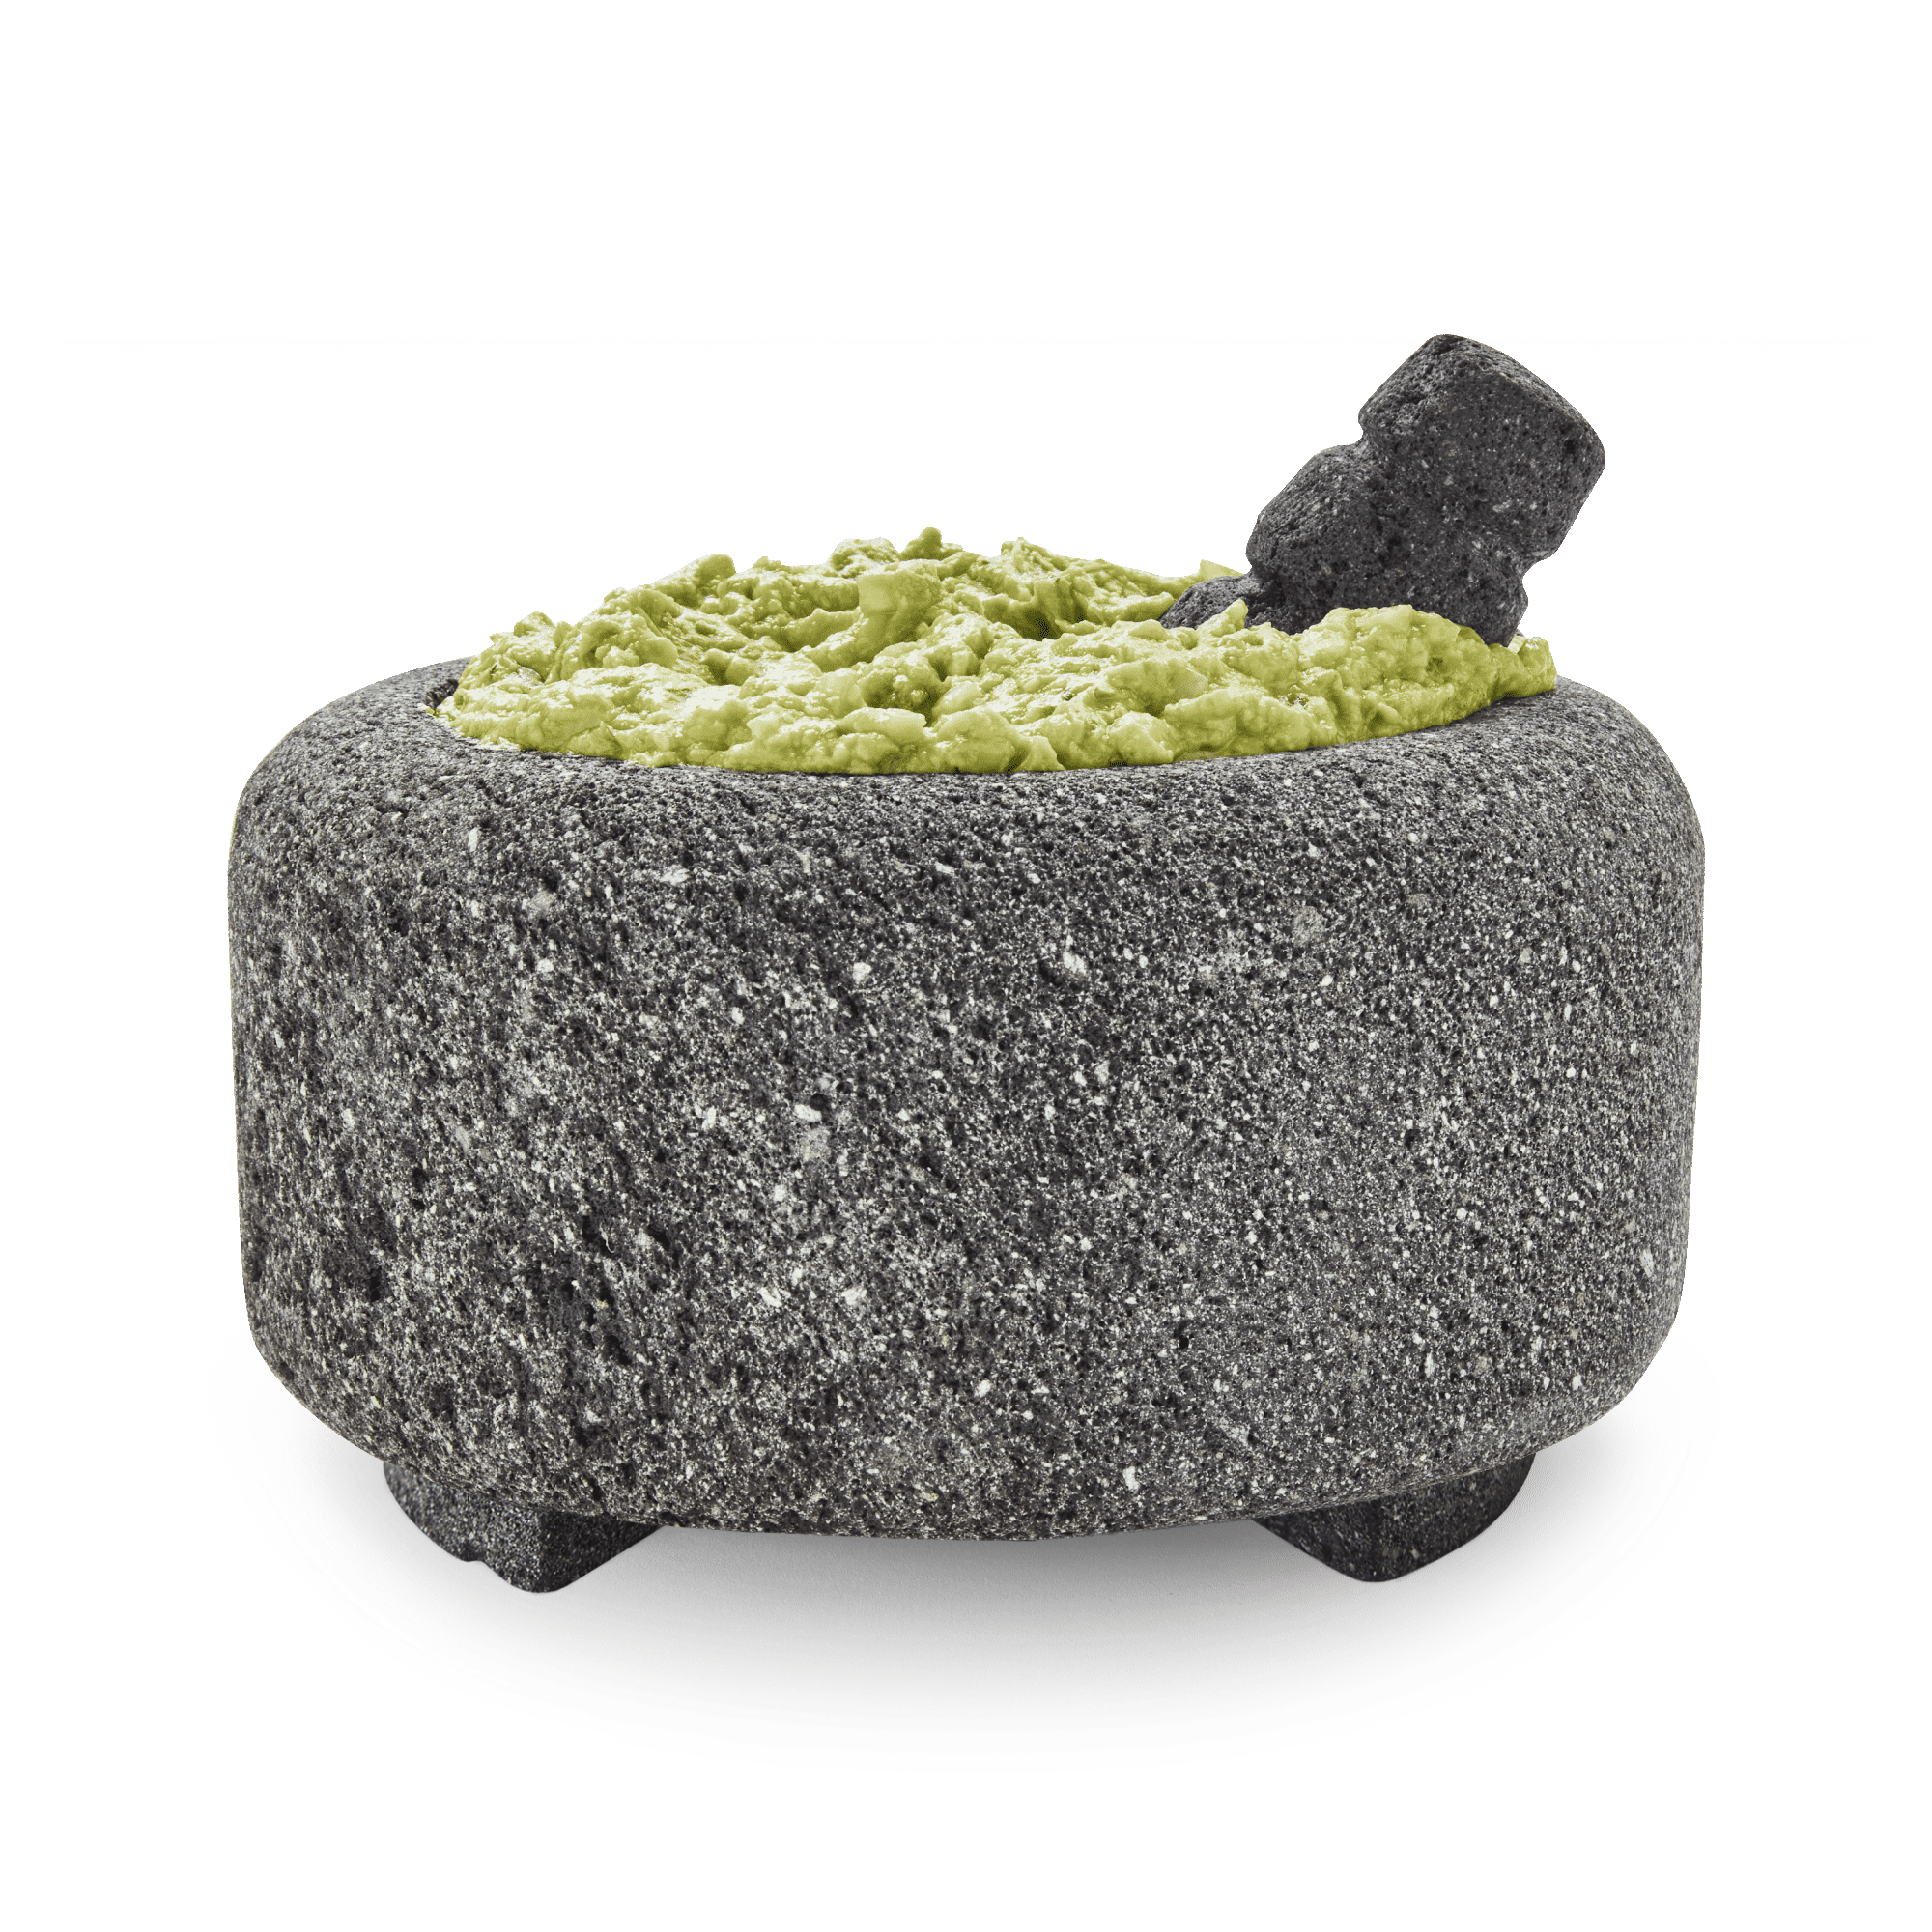 Molcajete | 9 in. Basalt Mortar & Pestle from Mexico | #1 of #8